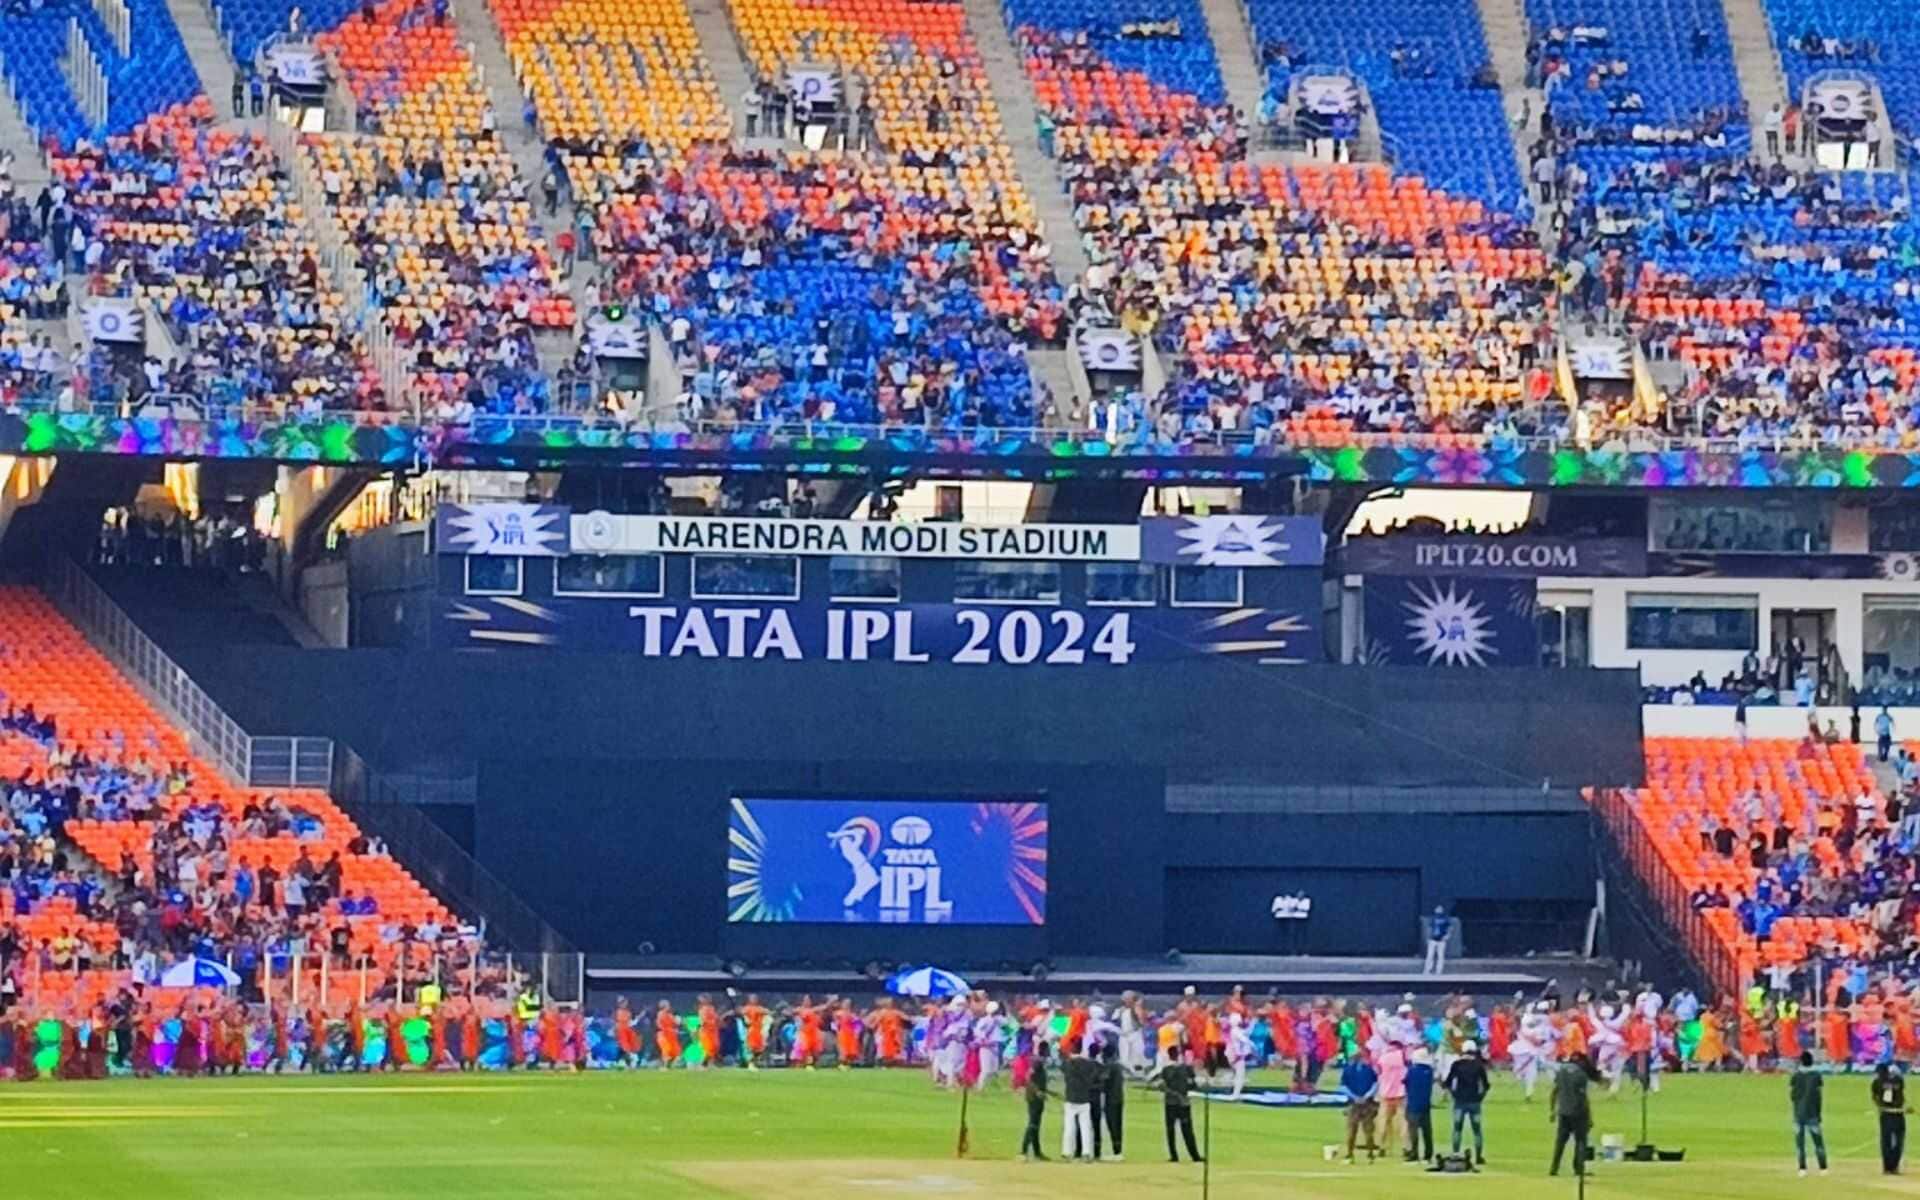 Special ceremony before GT vs MI for IPL 2024